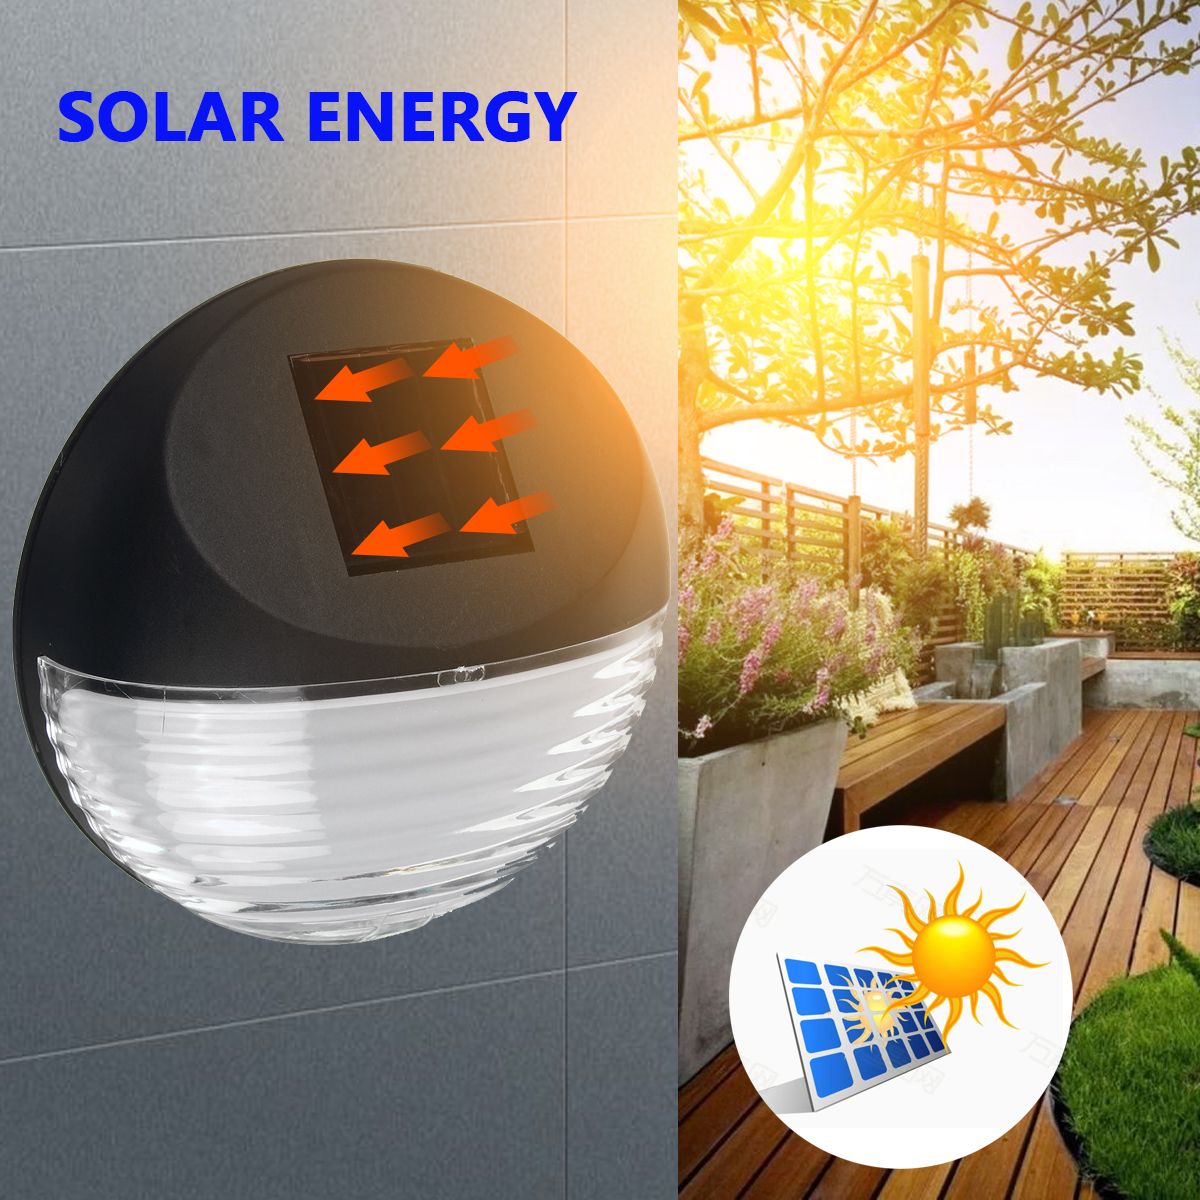 LED-Solar-Power-Garden-Fence-Lights-Wall-Light-Patio-Outdoor-Safety-Lamps-5W-1757542